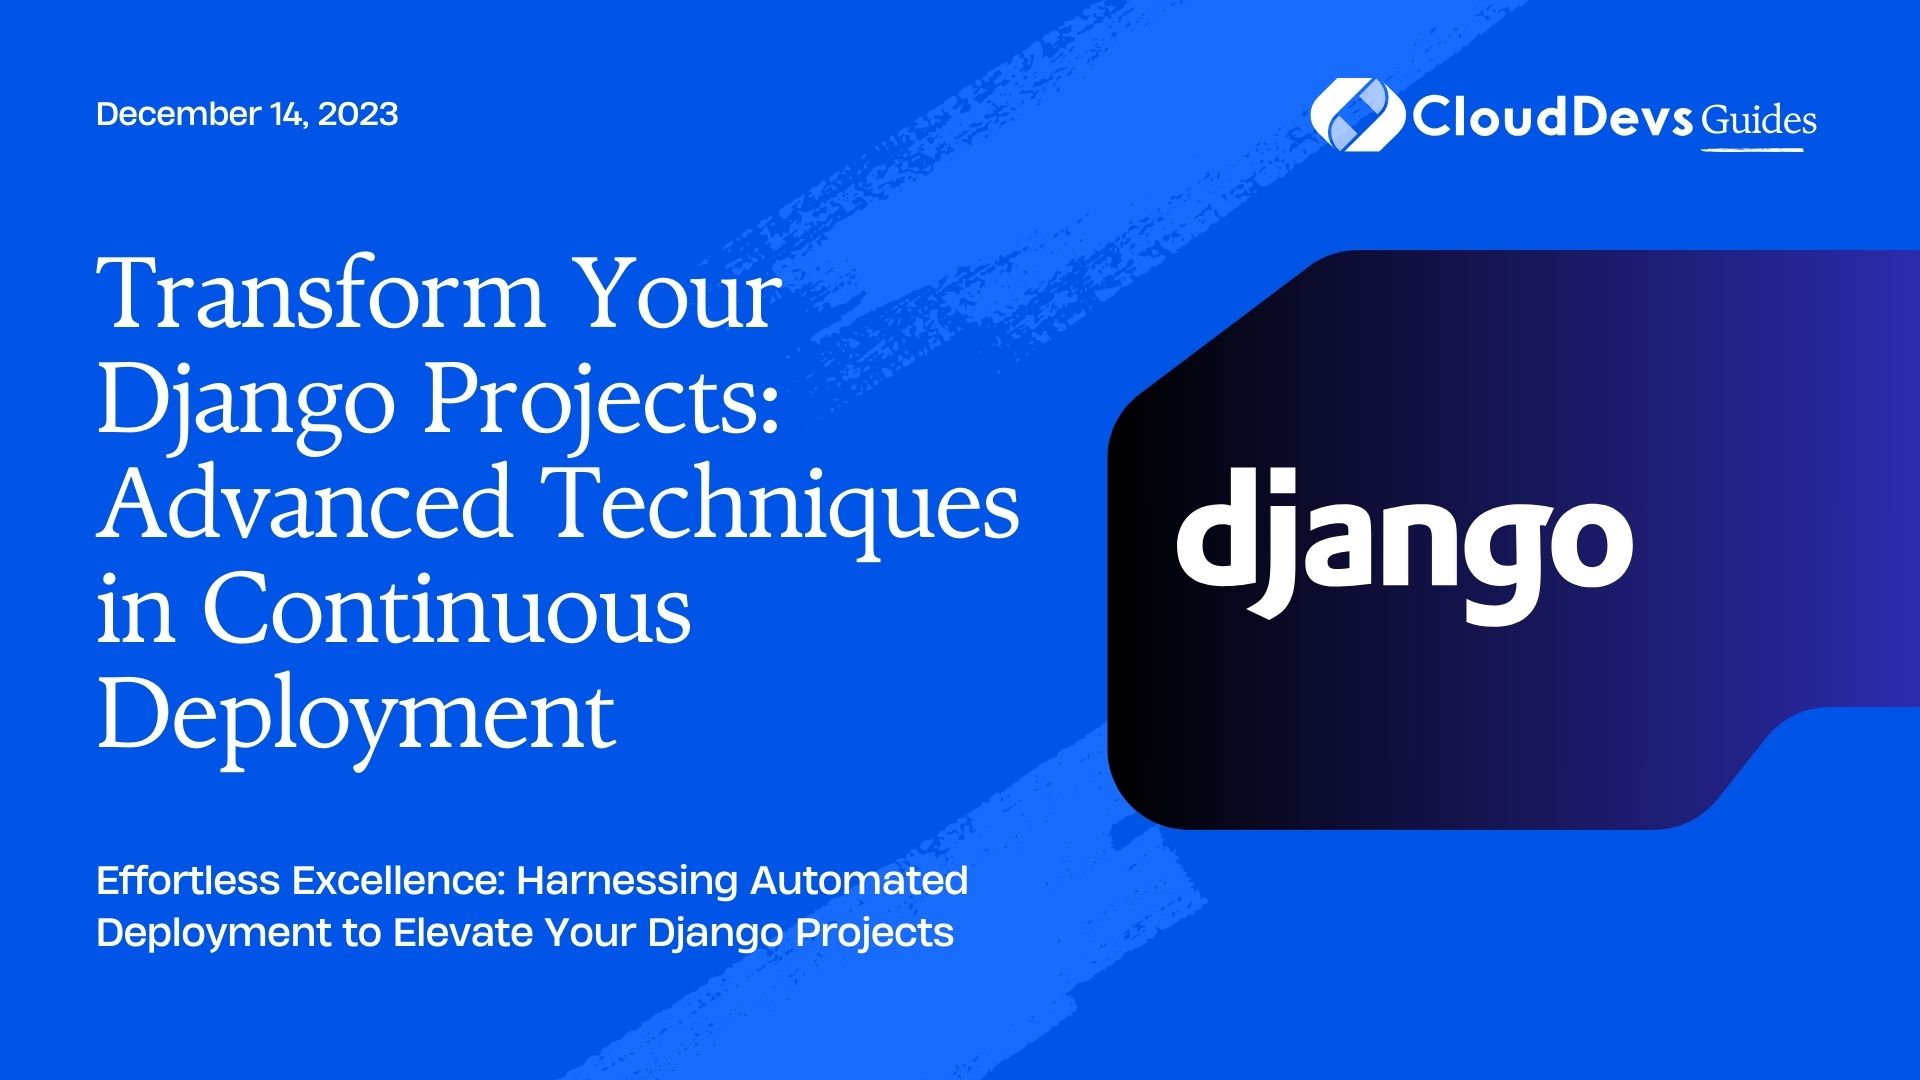 Transform Your Django Projects: Advanced Techniques in Continuous Deployment